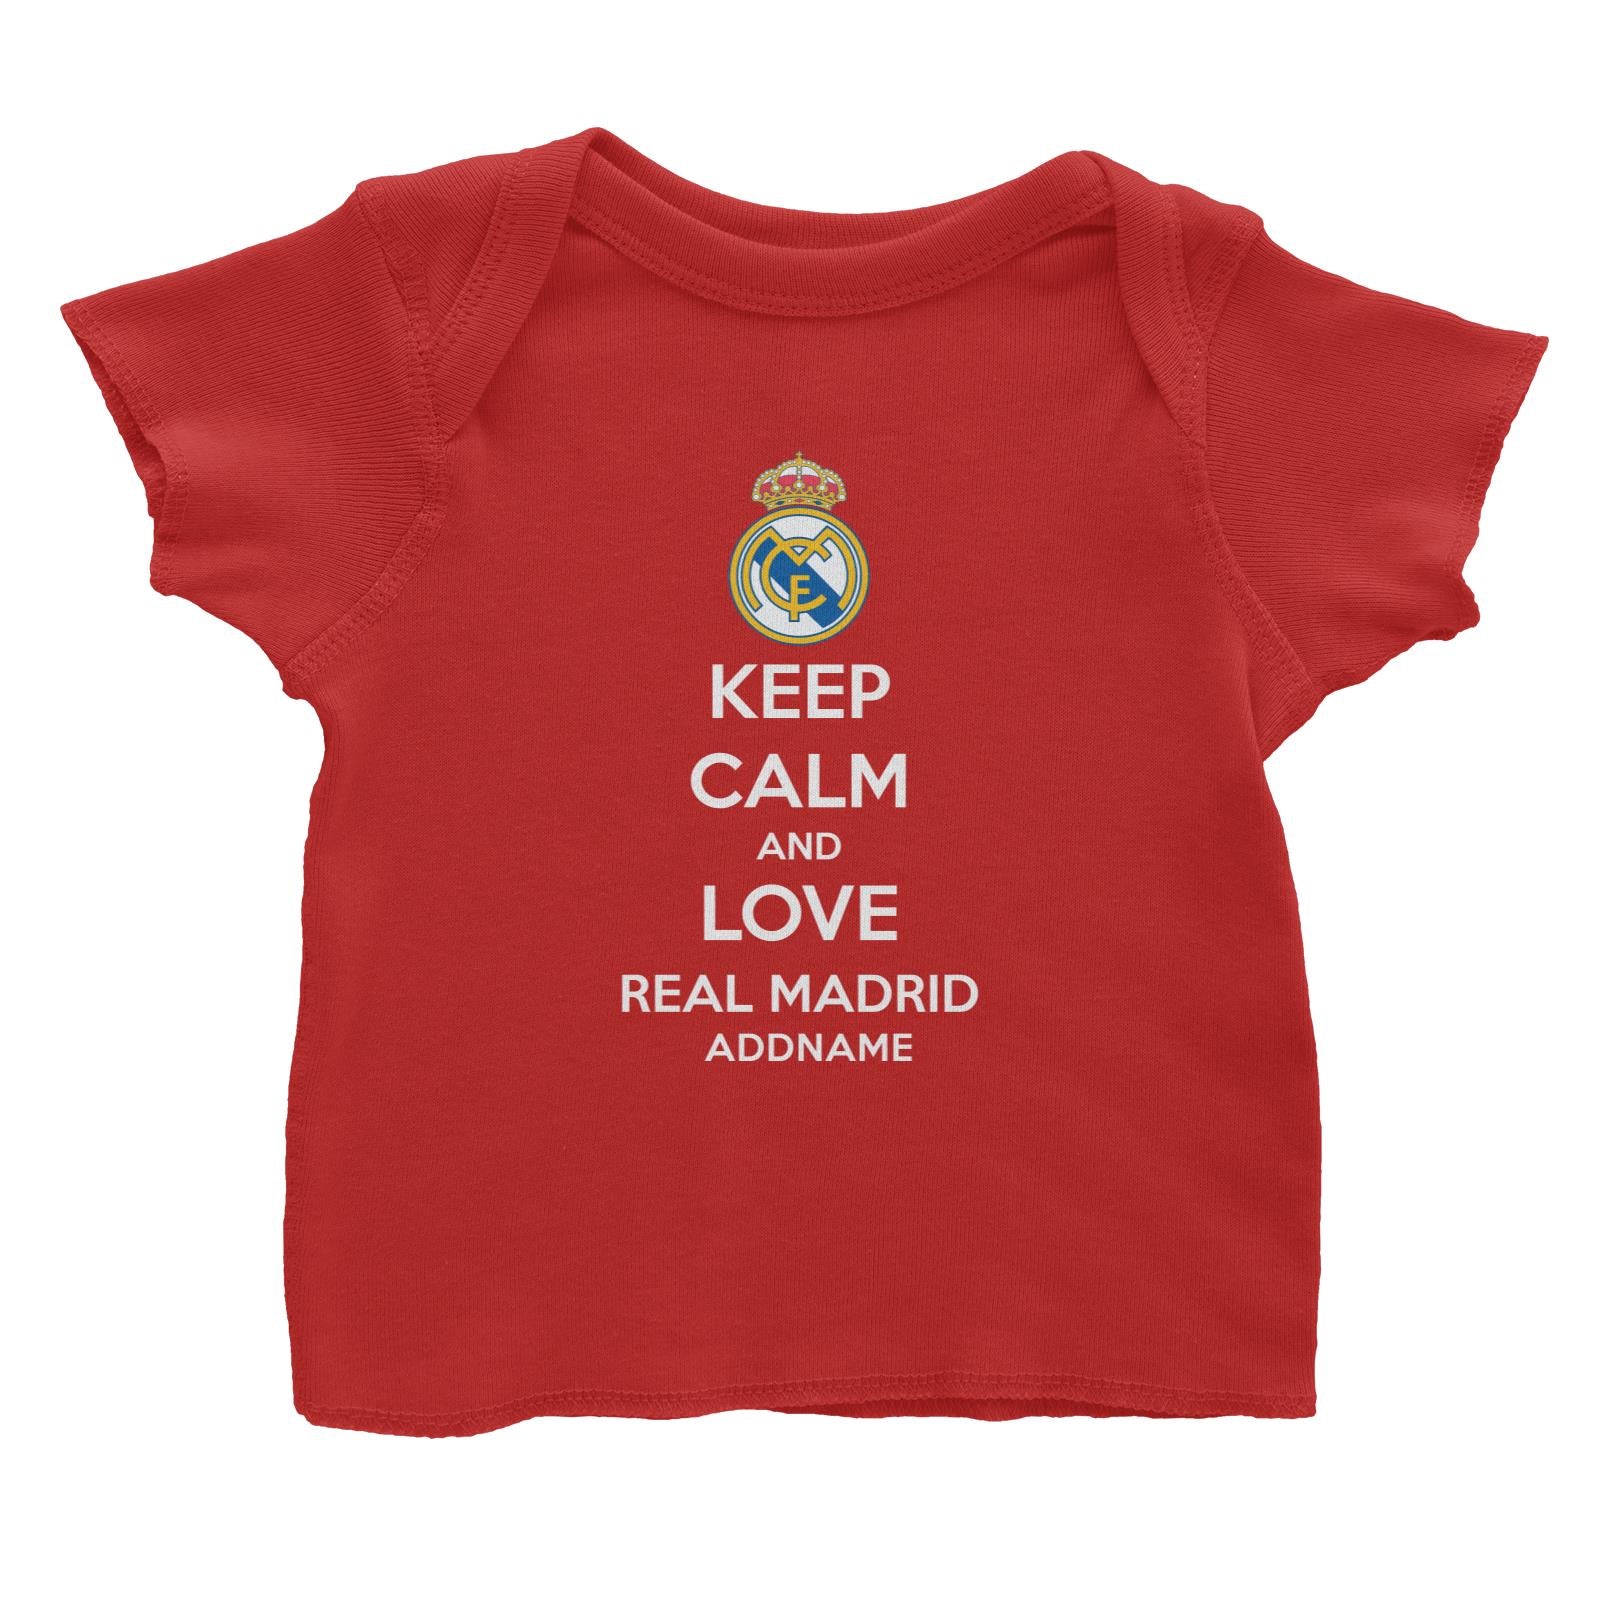 Real Madrid Football Keep Calm And Love Series Addname Baby T-Shirt